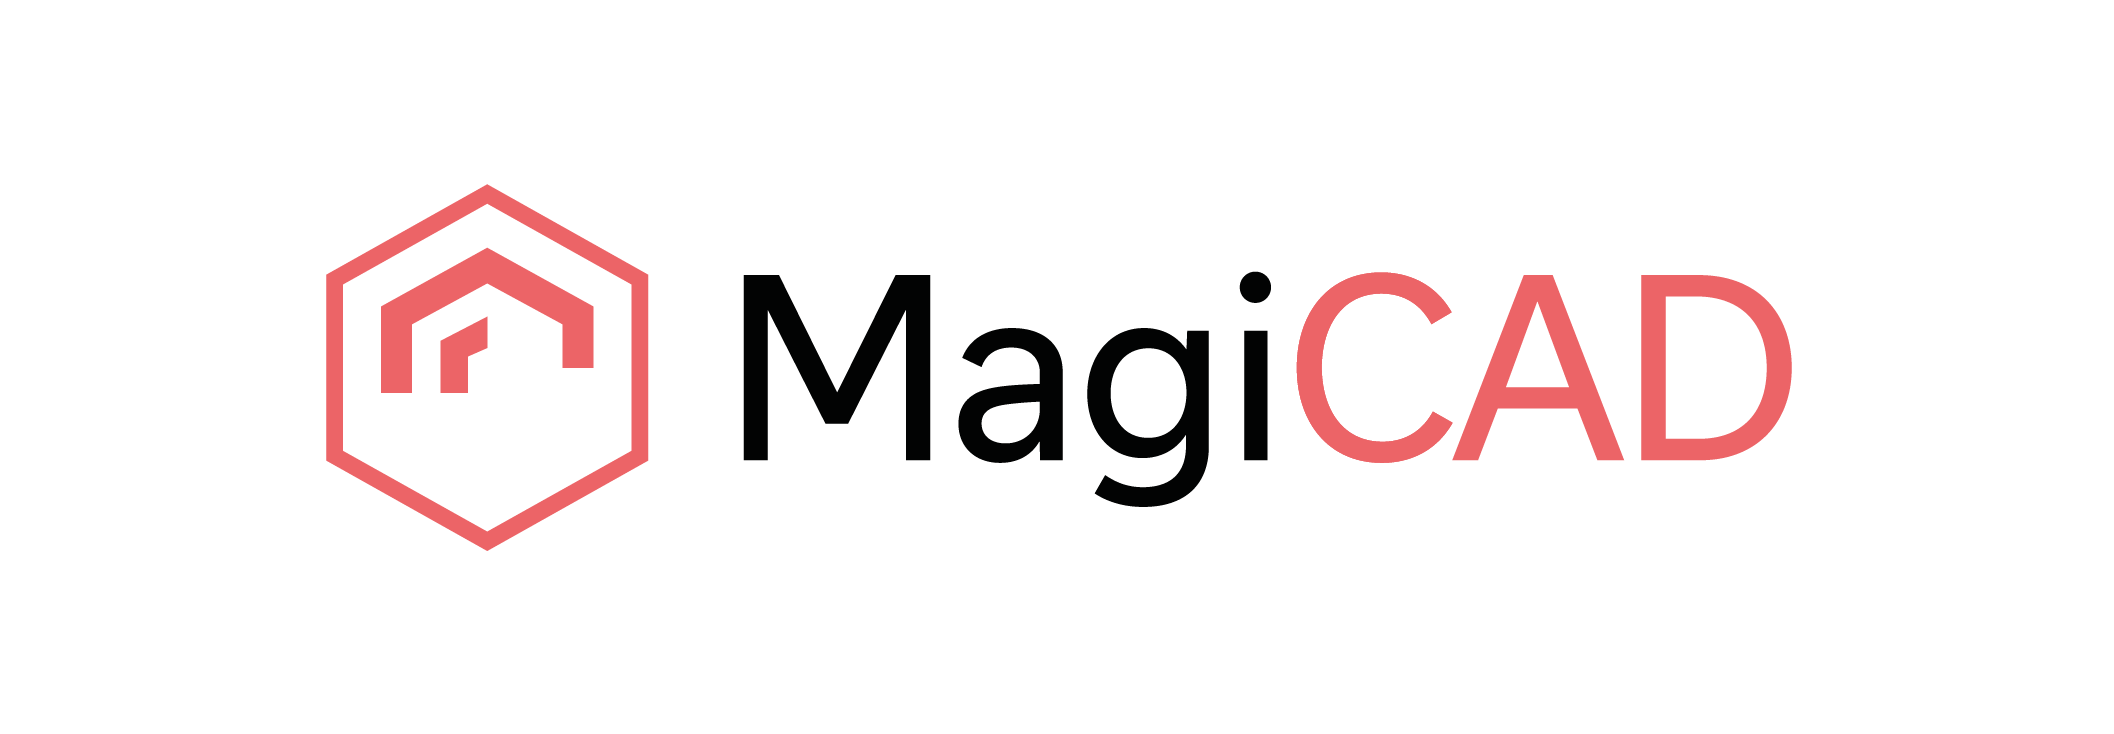 MagiCAD for Revit and AutoCAD